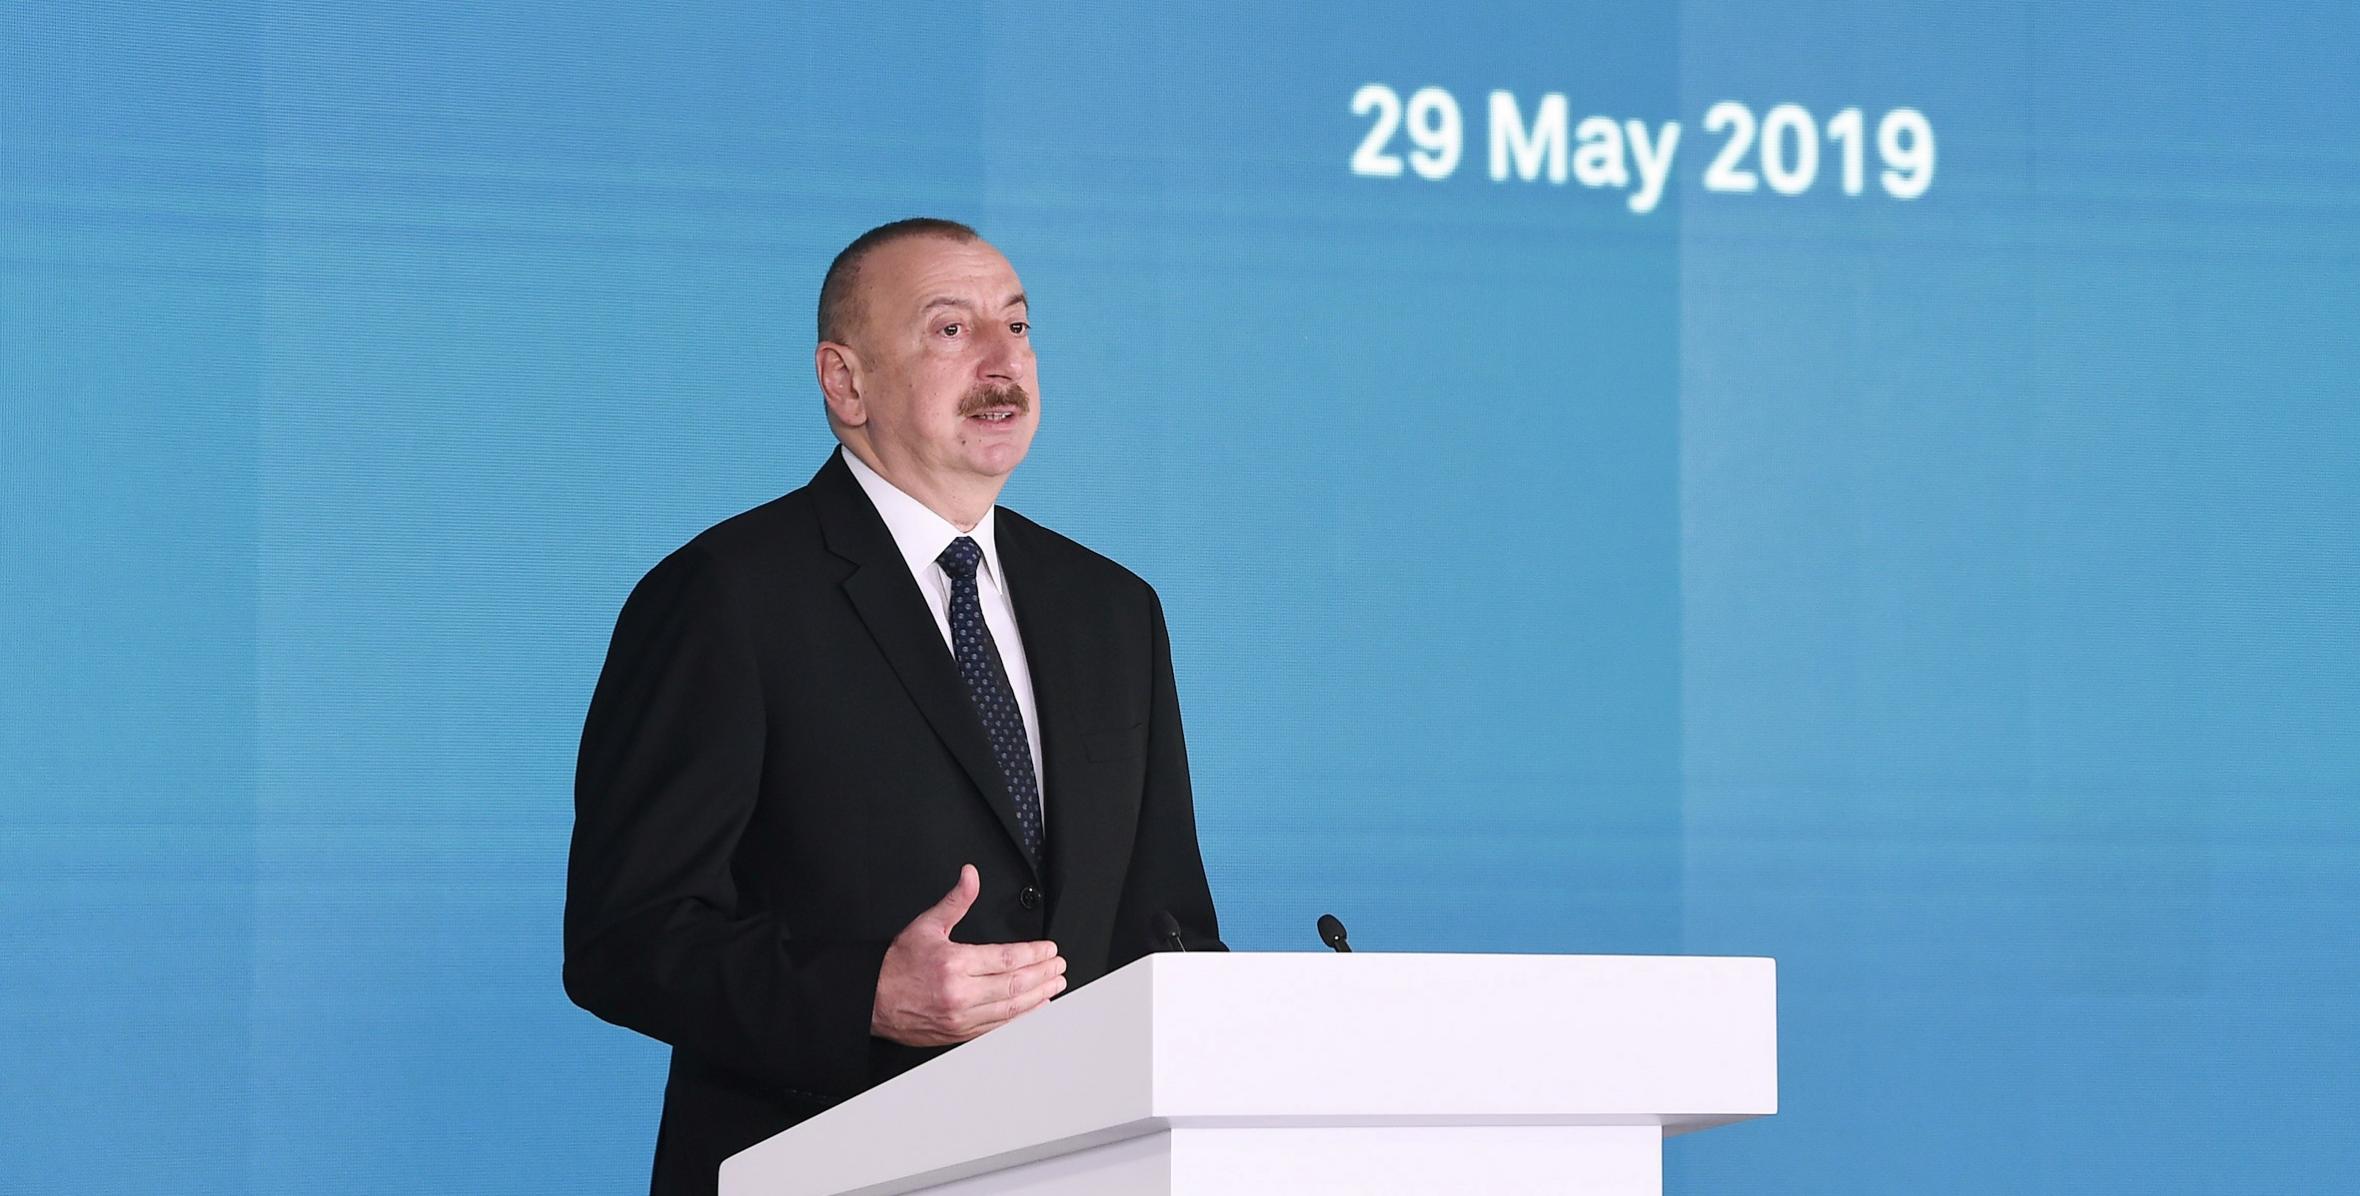 Ilham Aliyev attended opening of 26th International Caspian Oil & Gas-2019 Exhibition and Conference